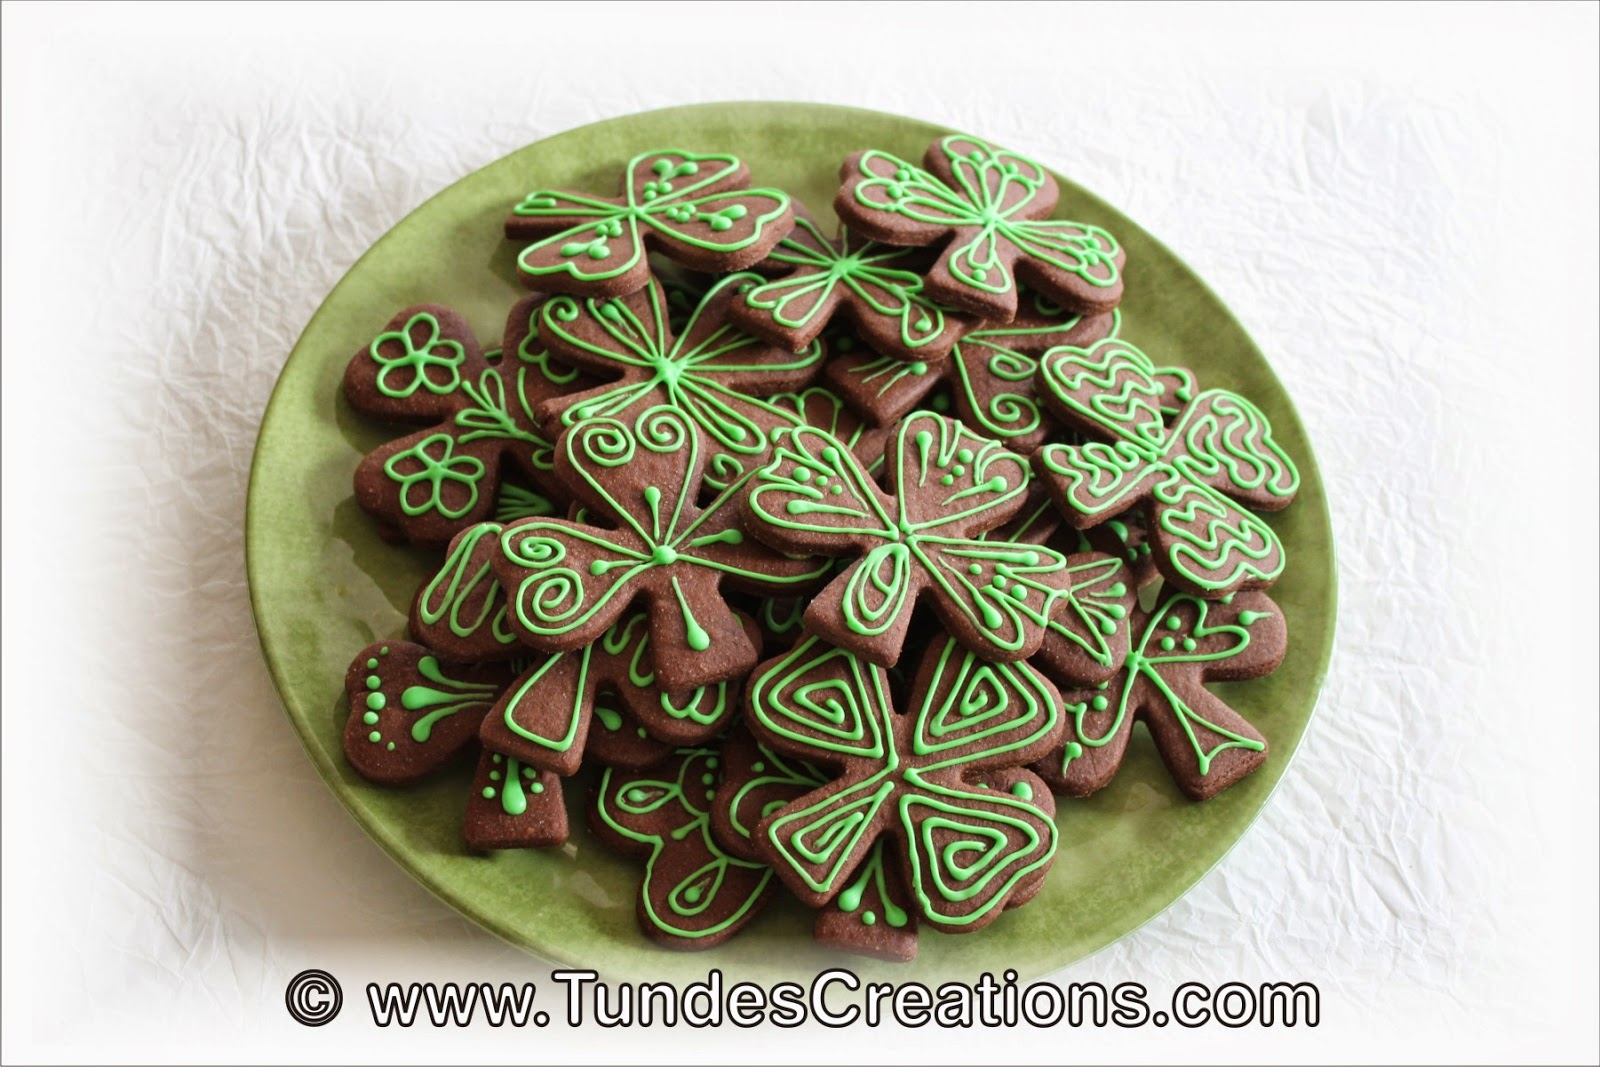 St. Patrick's Day chocolate cookies